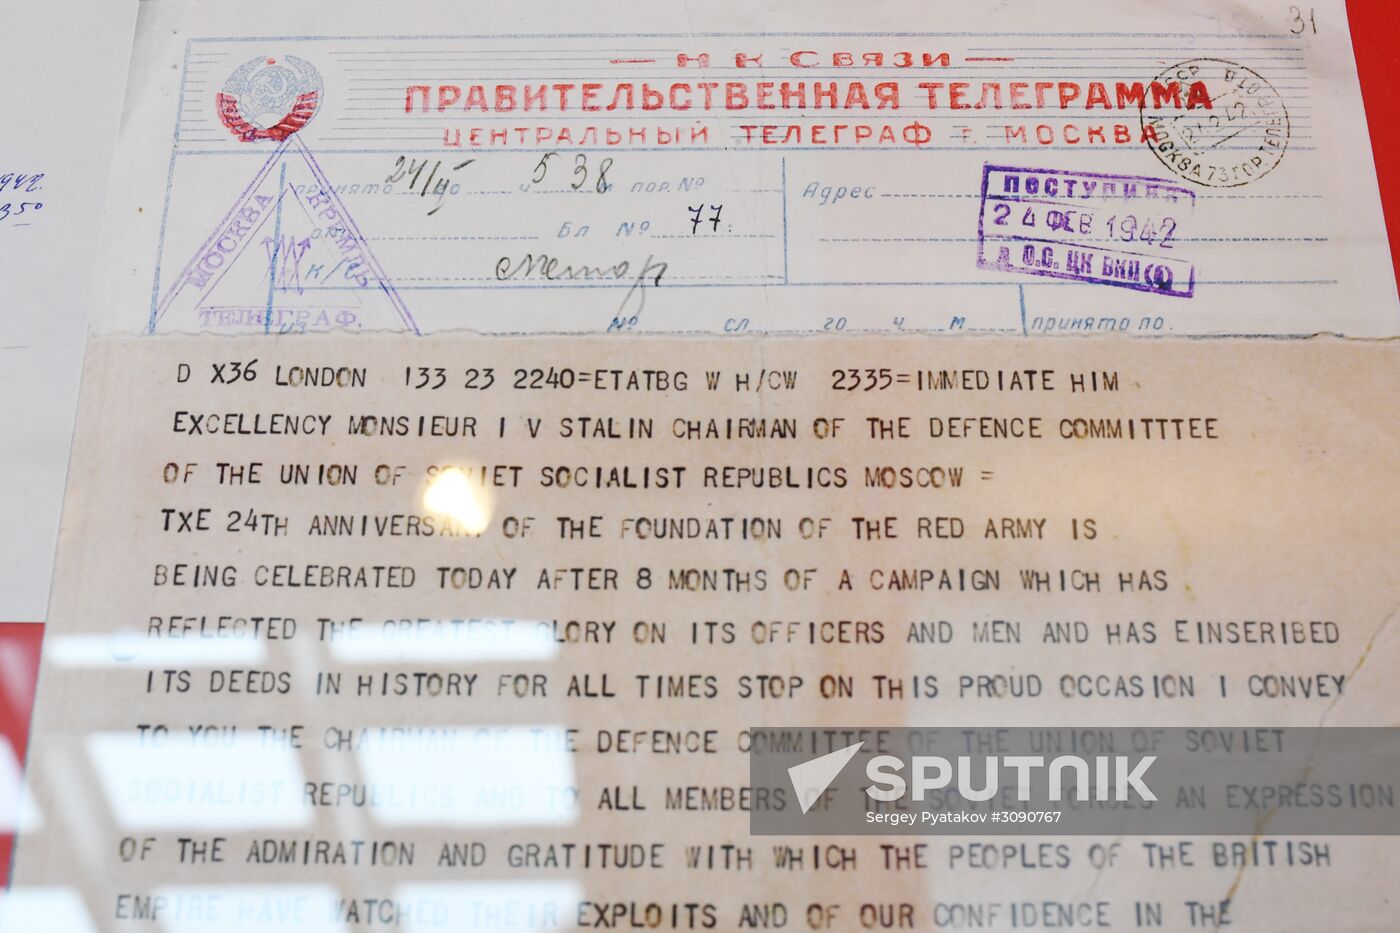 Historical document exhibition "1942: The Headquarters of Victory" unveiled